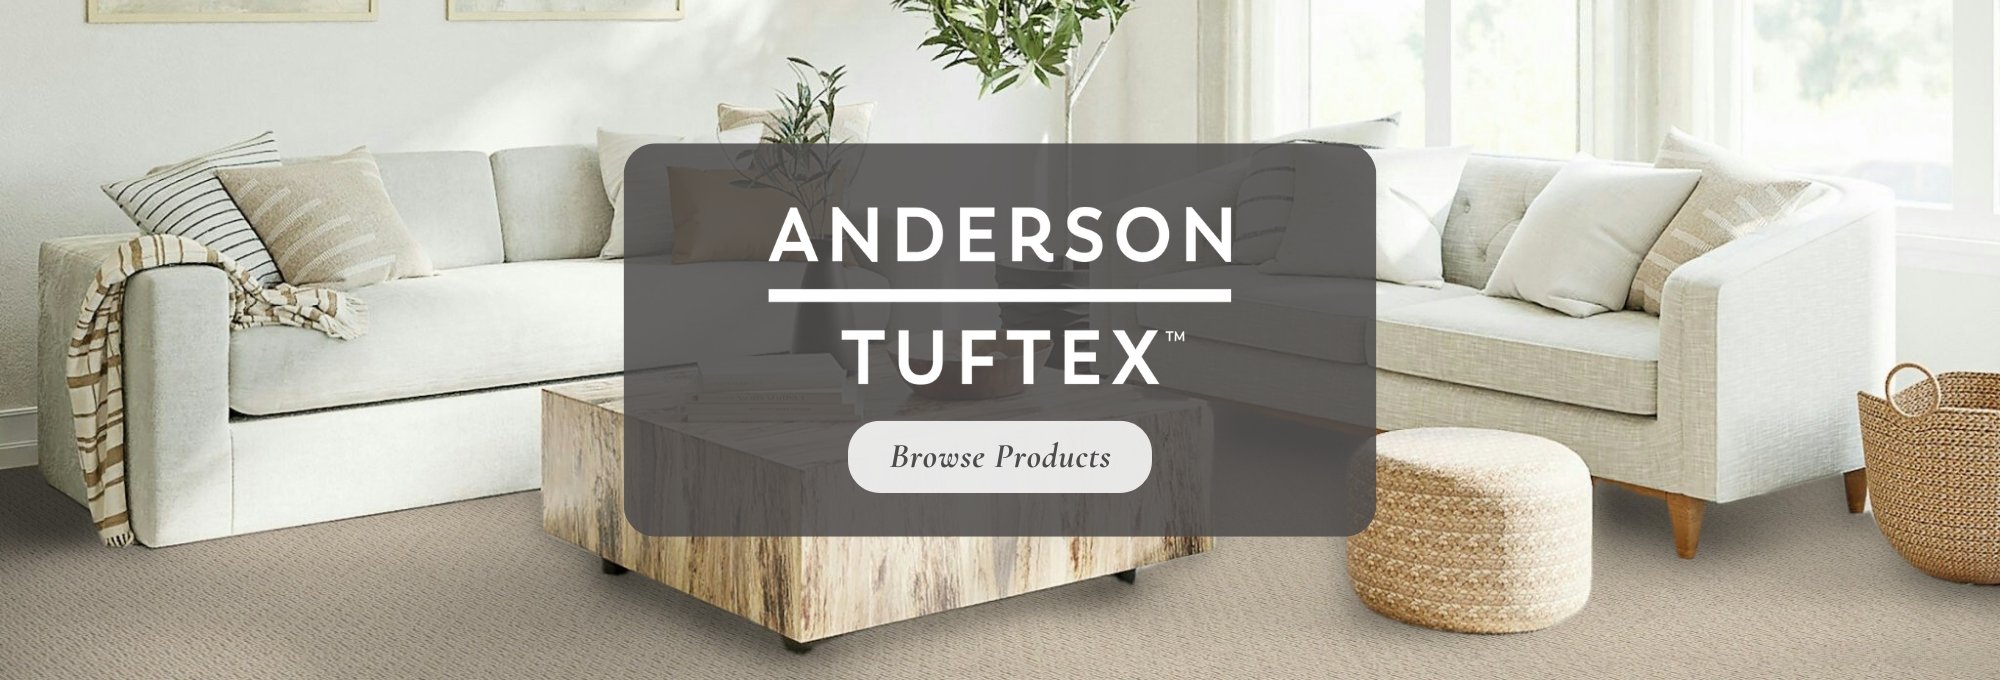 Browse Anderson Tuftex products